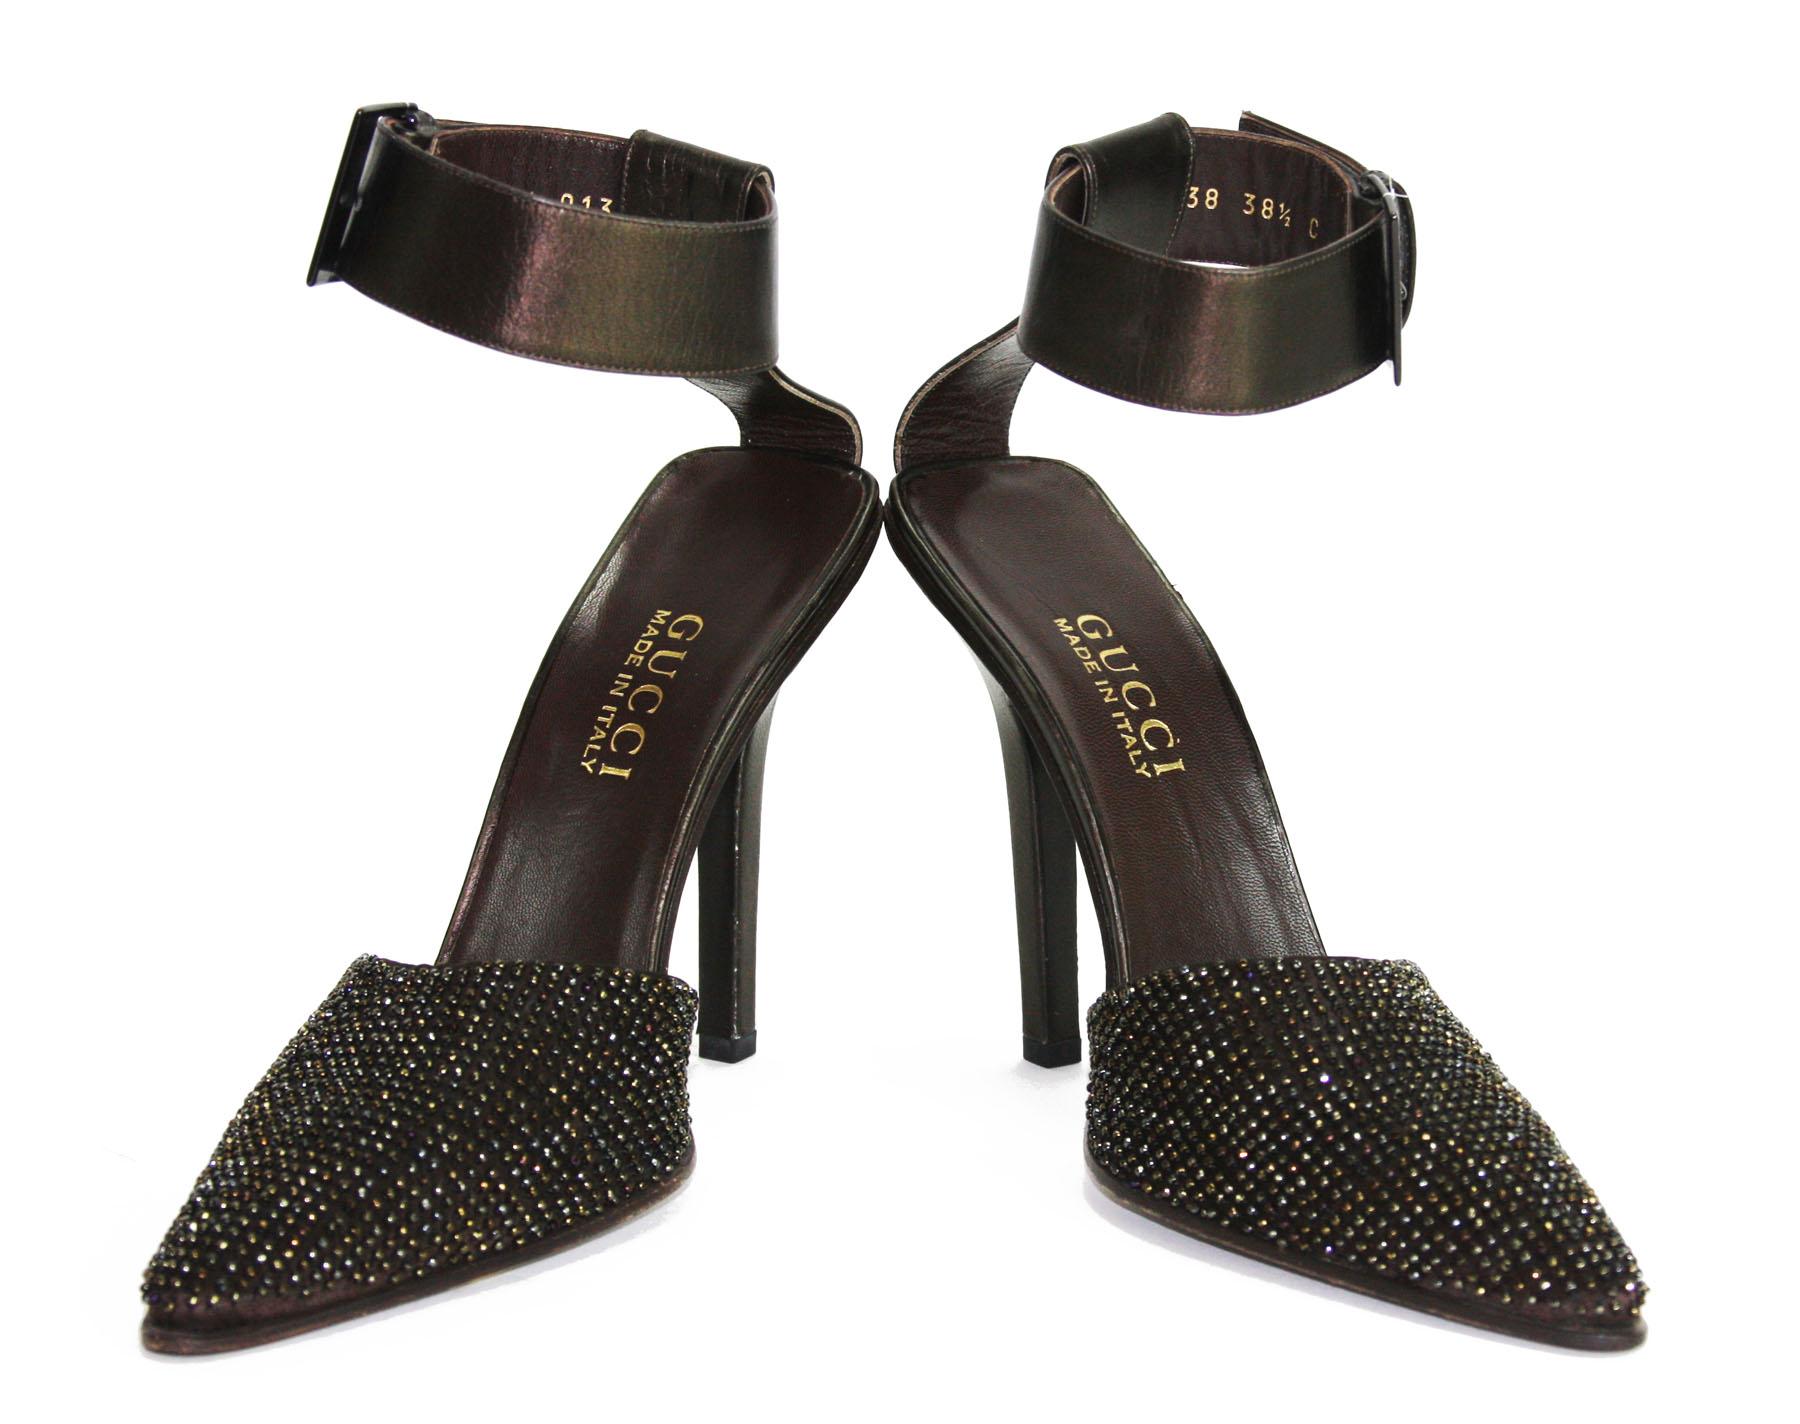 New Tom Ford for Gucci Beaded Ankle-Strap Shoes Heels
Designer size - 38.5 C ( US 8.5 )
1997 Collection
Micro-beaded Over the Chocolate Brown Satin Upper, Wide Leather Ankle Strap with Adjustable Buckle, Leather Lining and Sole.
Heel height - 4